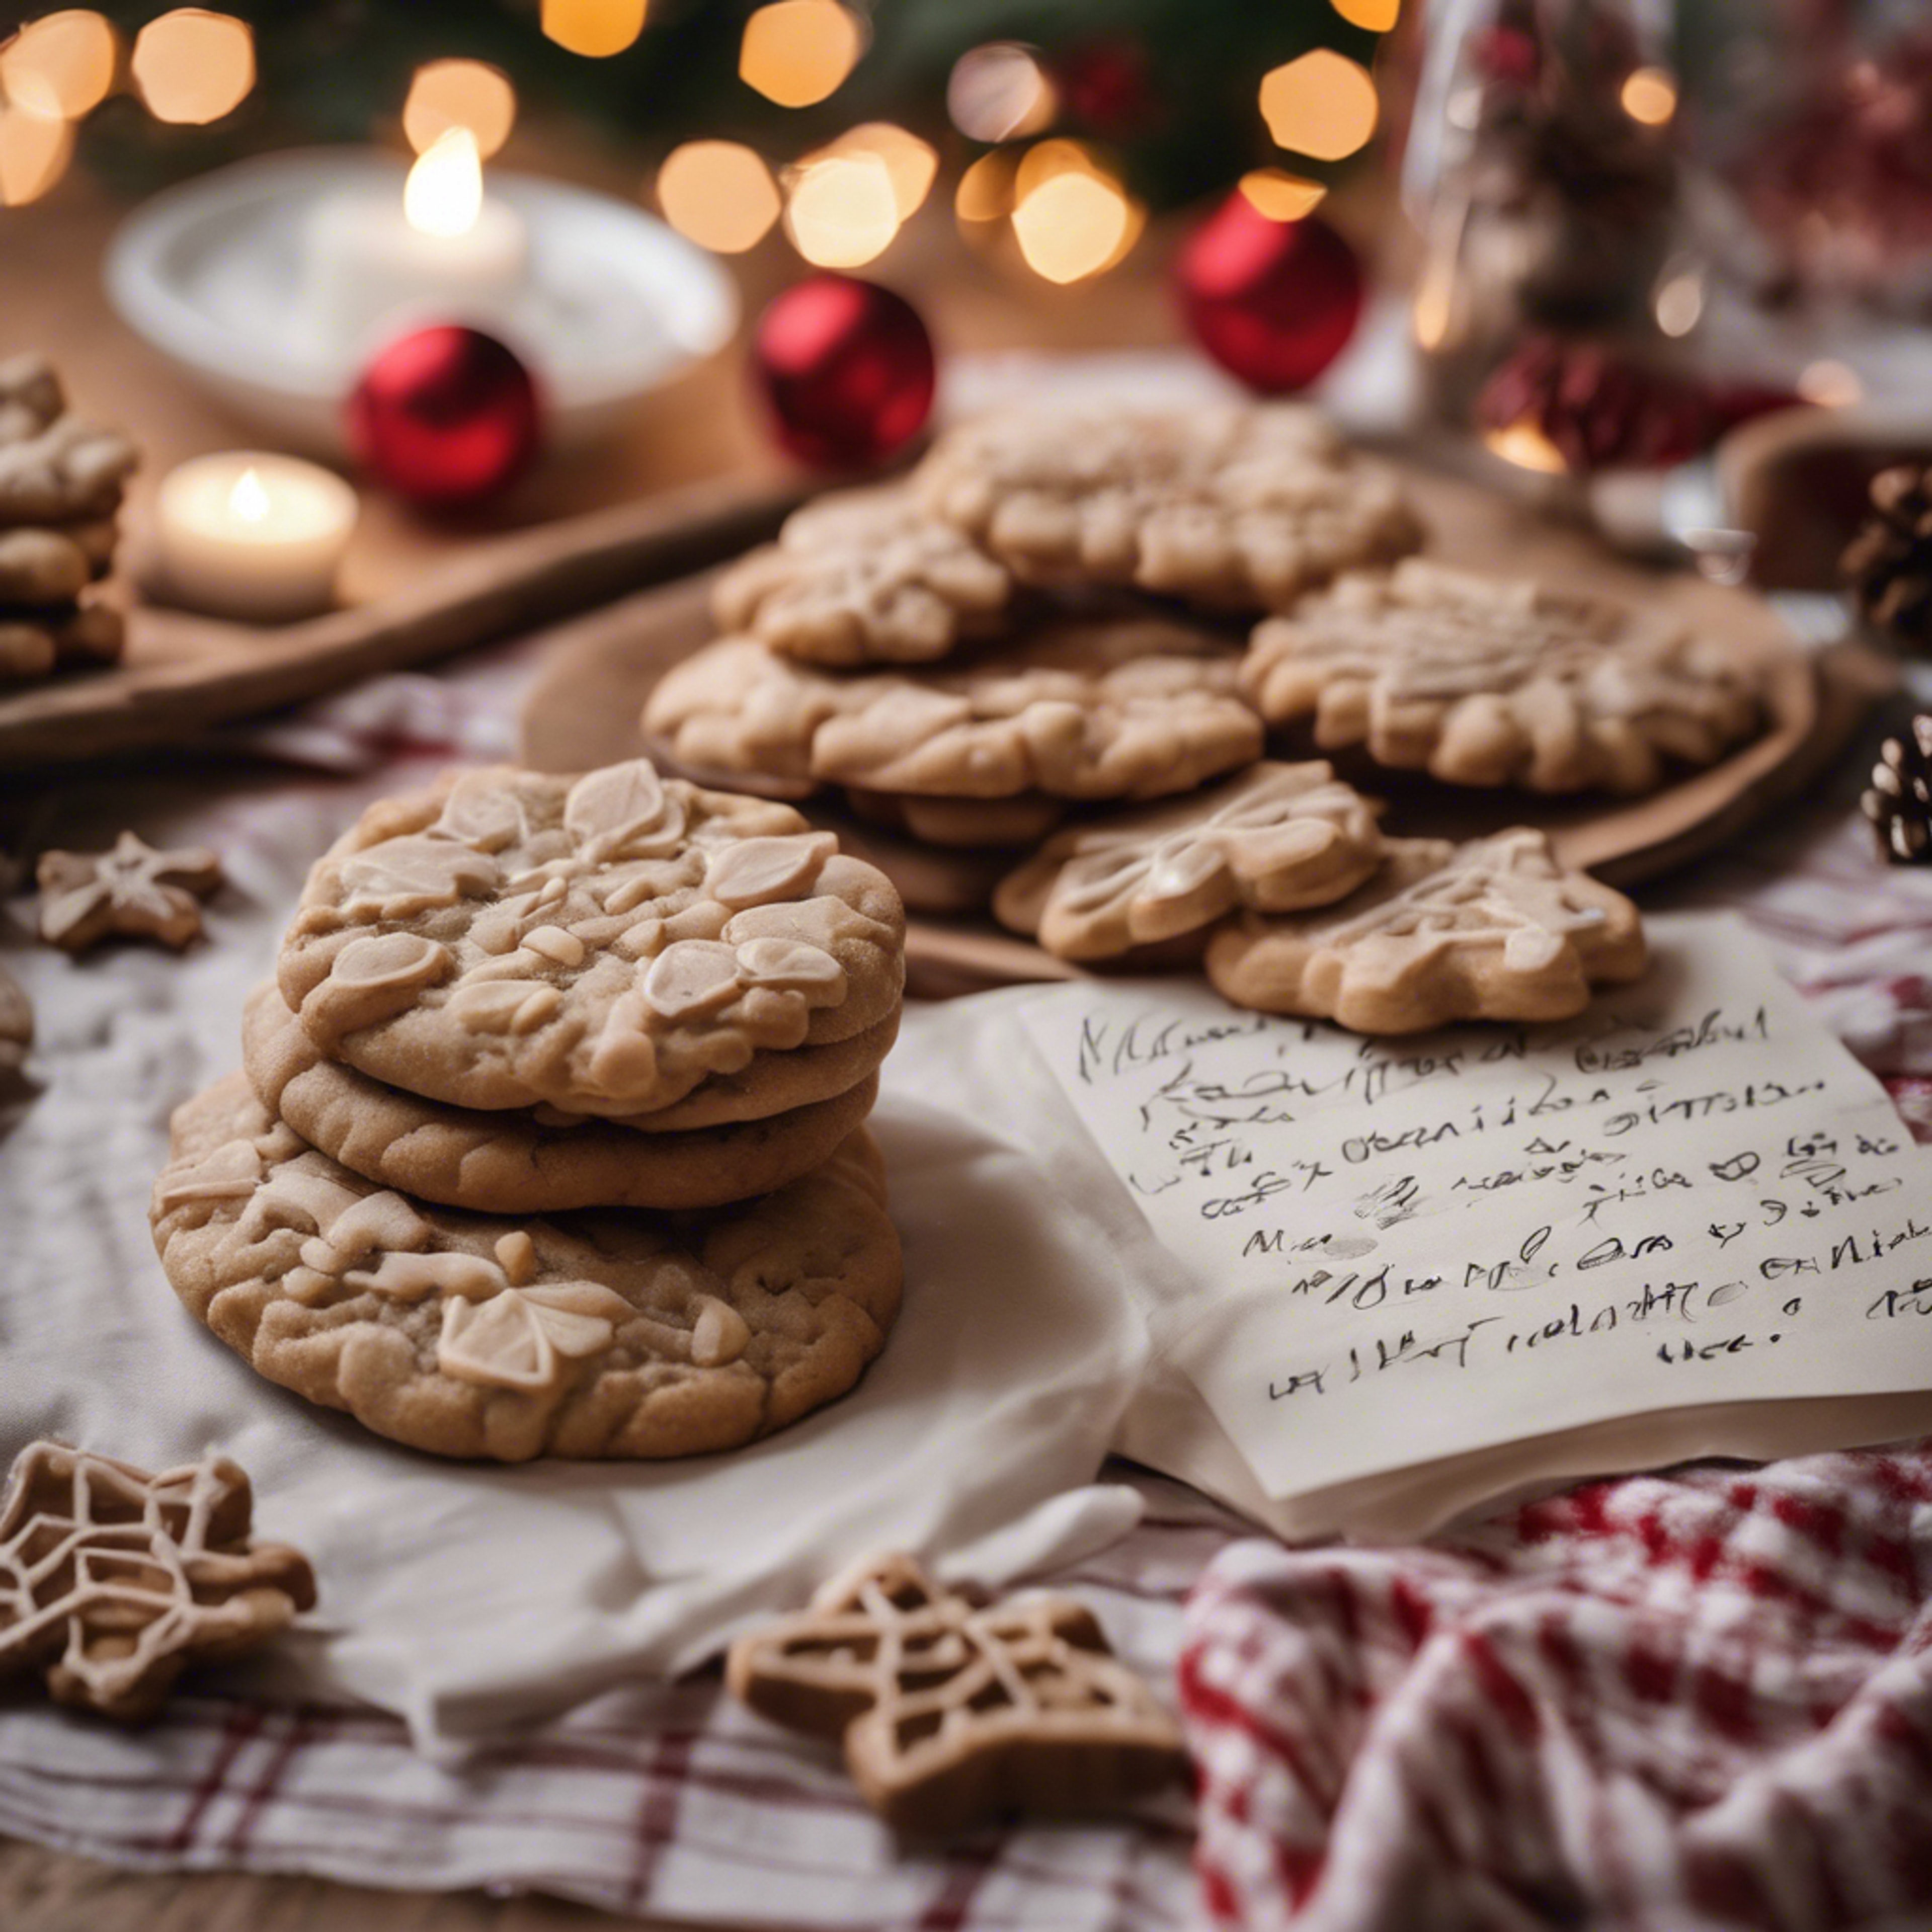 A spread of cozy, homemade Christmas cookies on a festive tablecloth, a glass of milk, and a note to Santa. Wallpaper[2a748ec29b0a47b6b2f7]